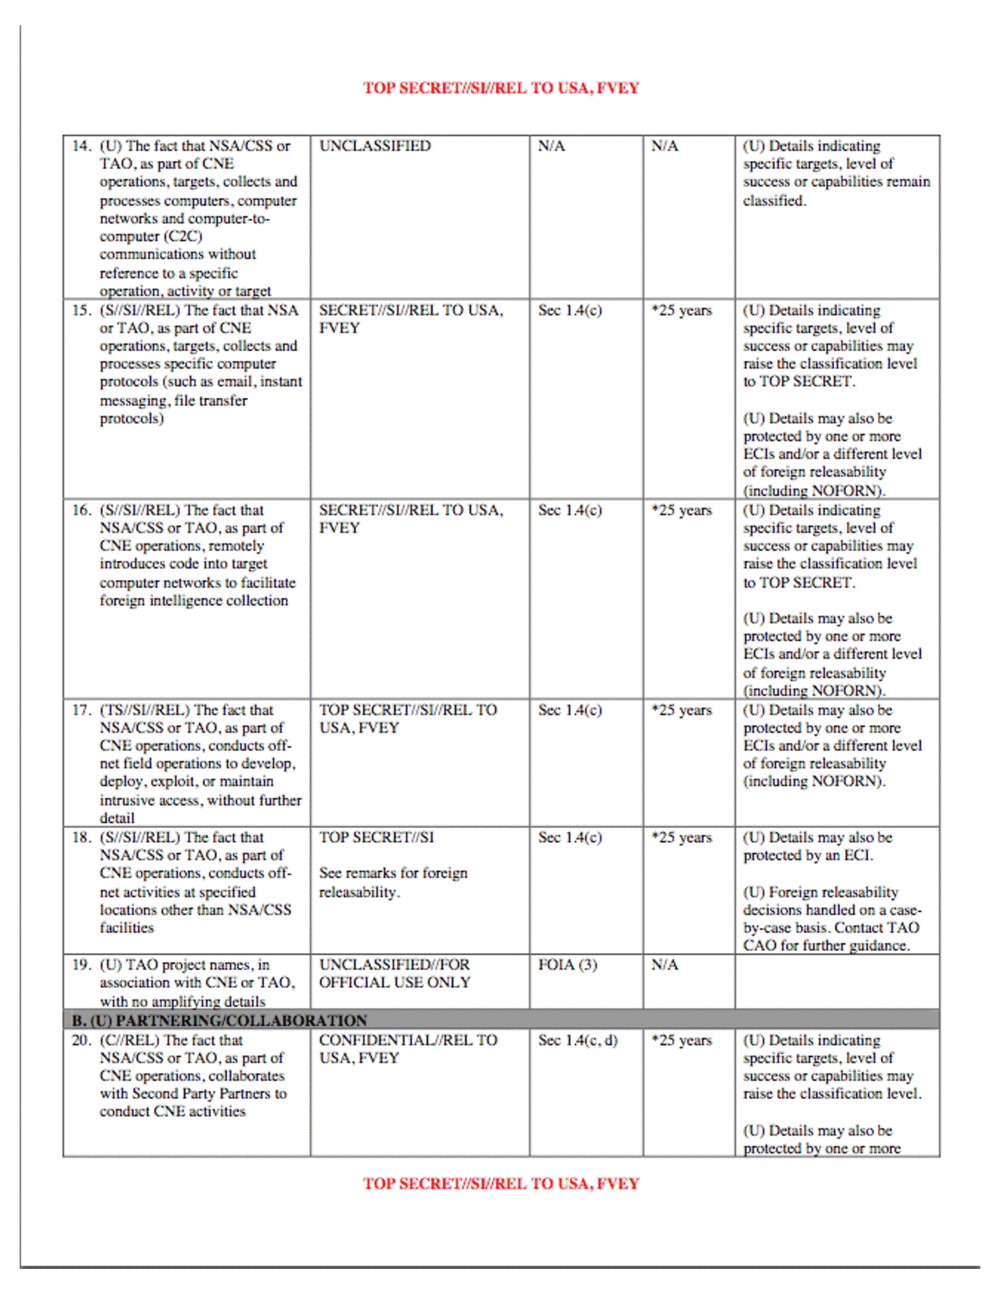 Page 3 from Computer Network Exploitation Classification Guide